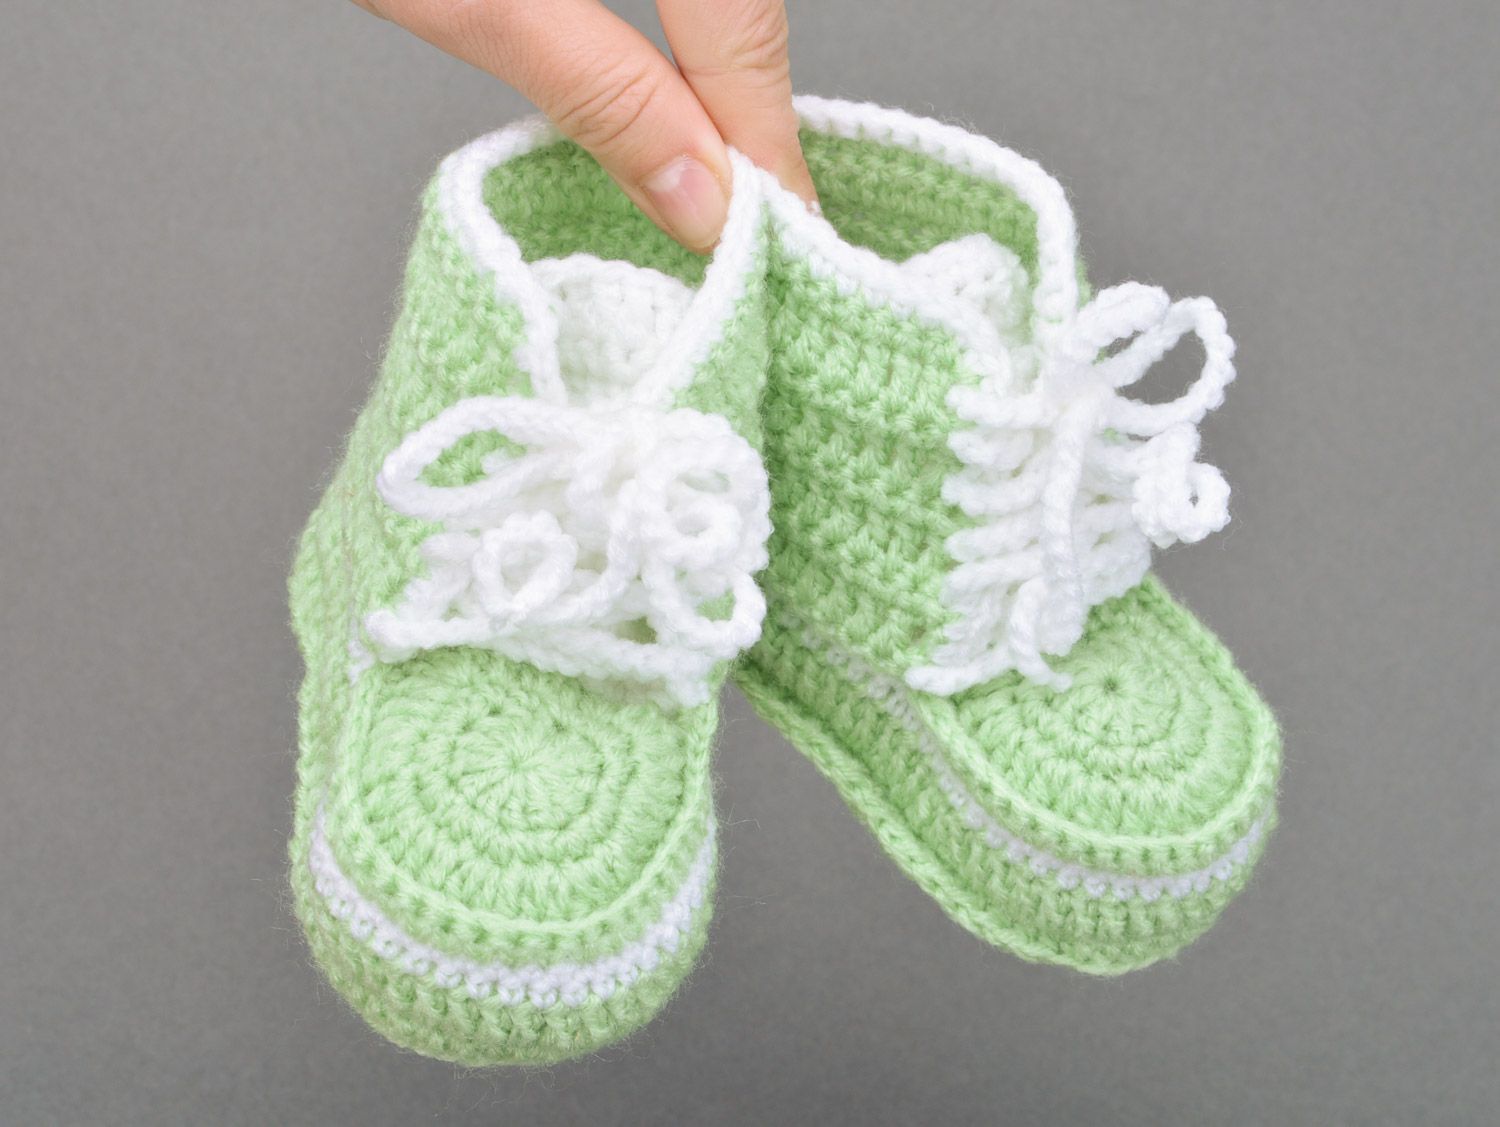 Handmade crocheted lace light green baby booties made of cotton photo 3